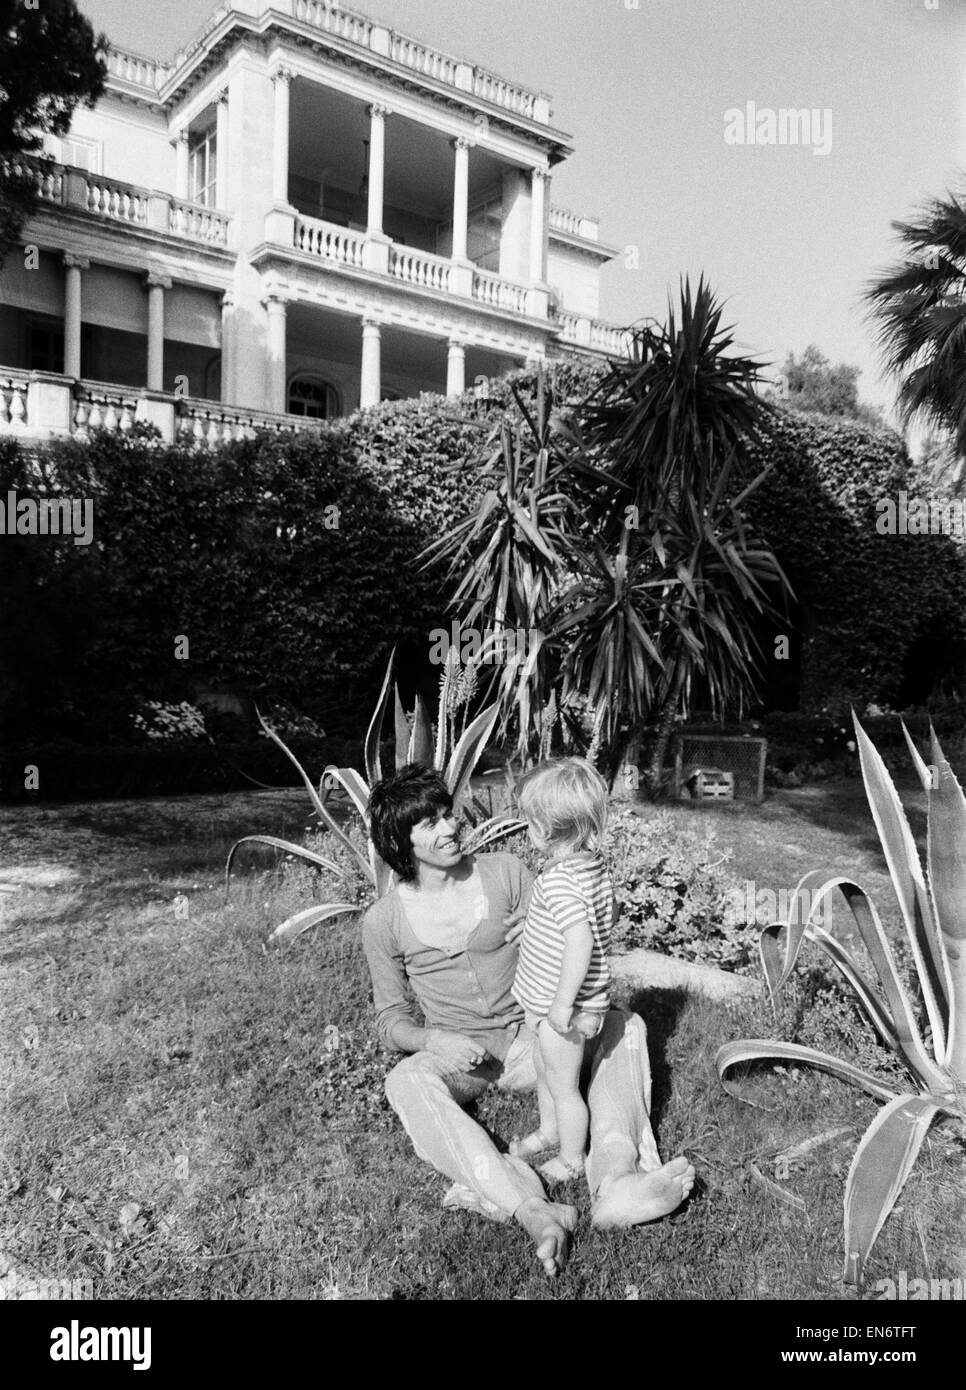 Keith Richards of The Rolling Stones with his son Marlon at his home, the rented Villa Nellcôte, a 19th century sixteen-room mansion on the waterfront of Villefranche-sur-Mer in the Côte d'Azur where the band recorded Exile on Main Street. April 1971 Stock Photo